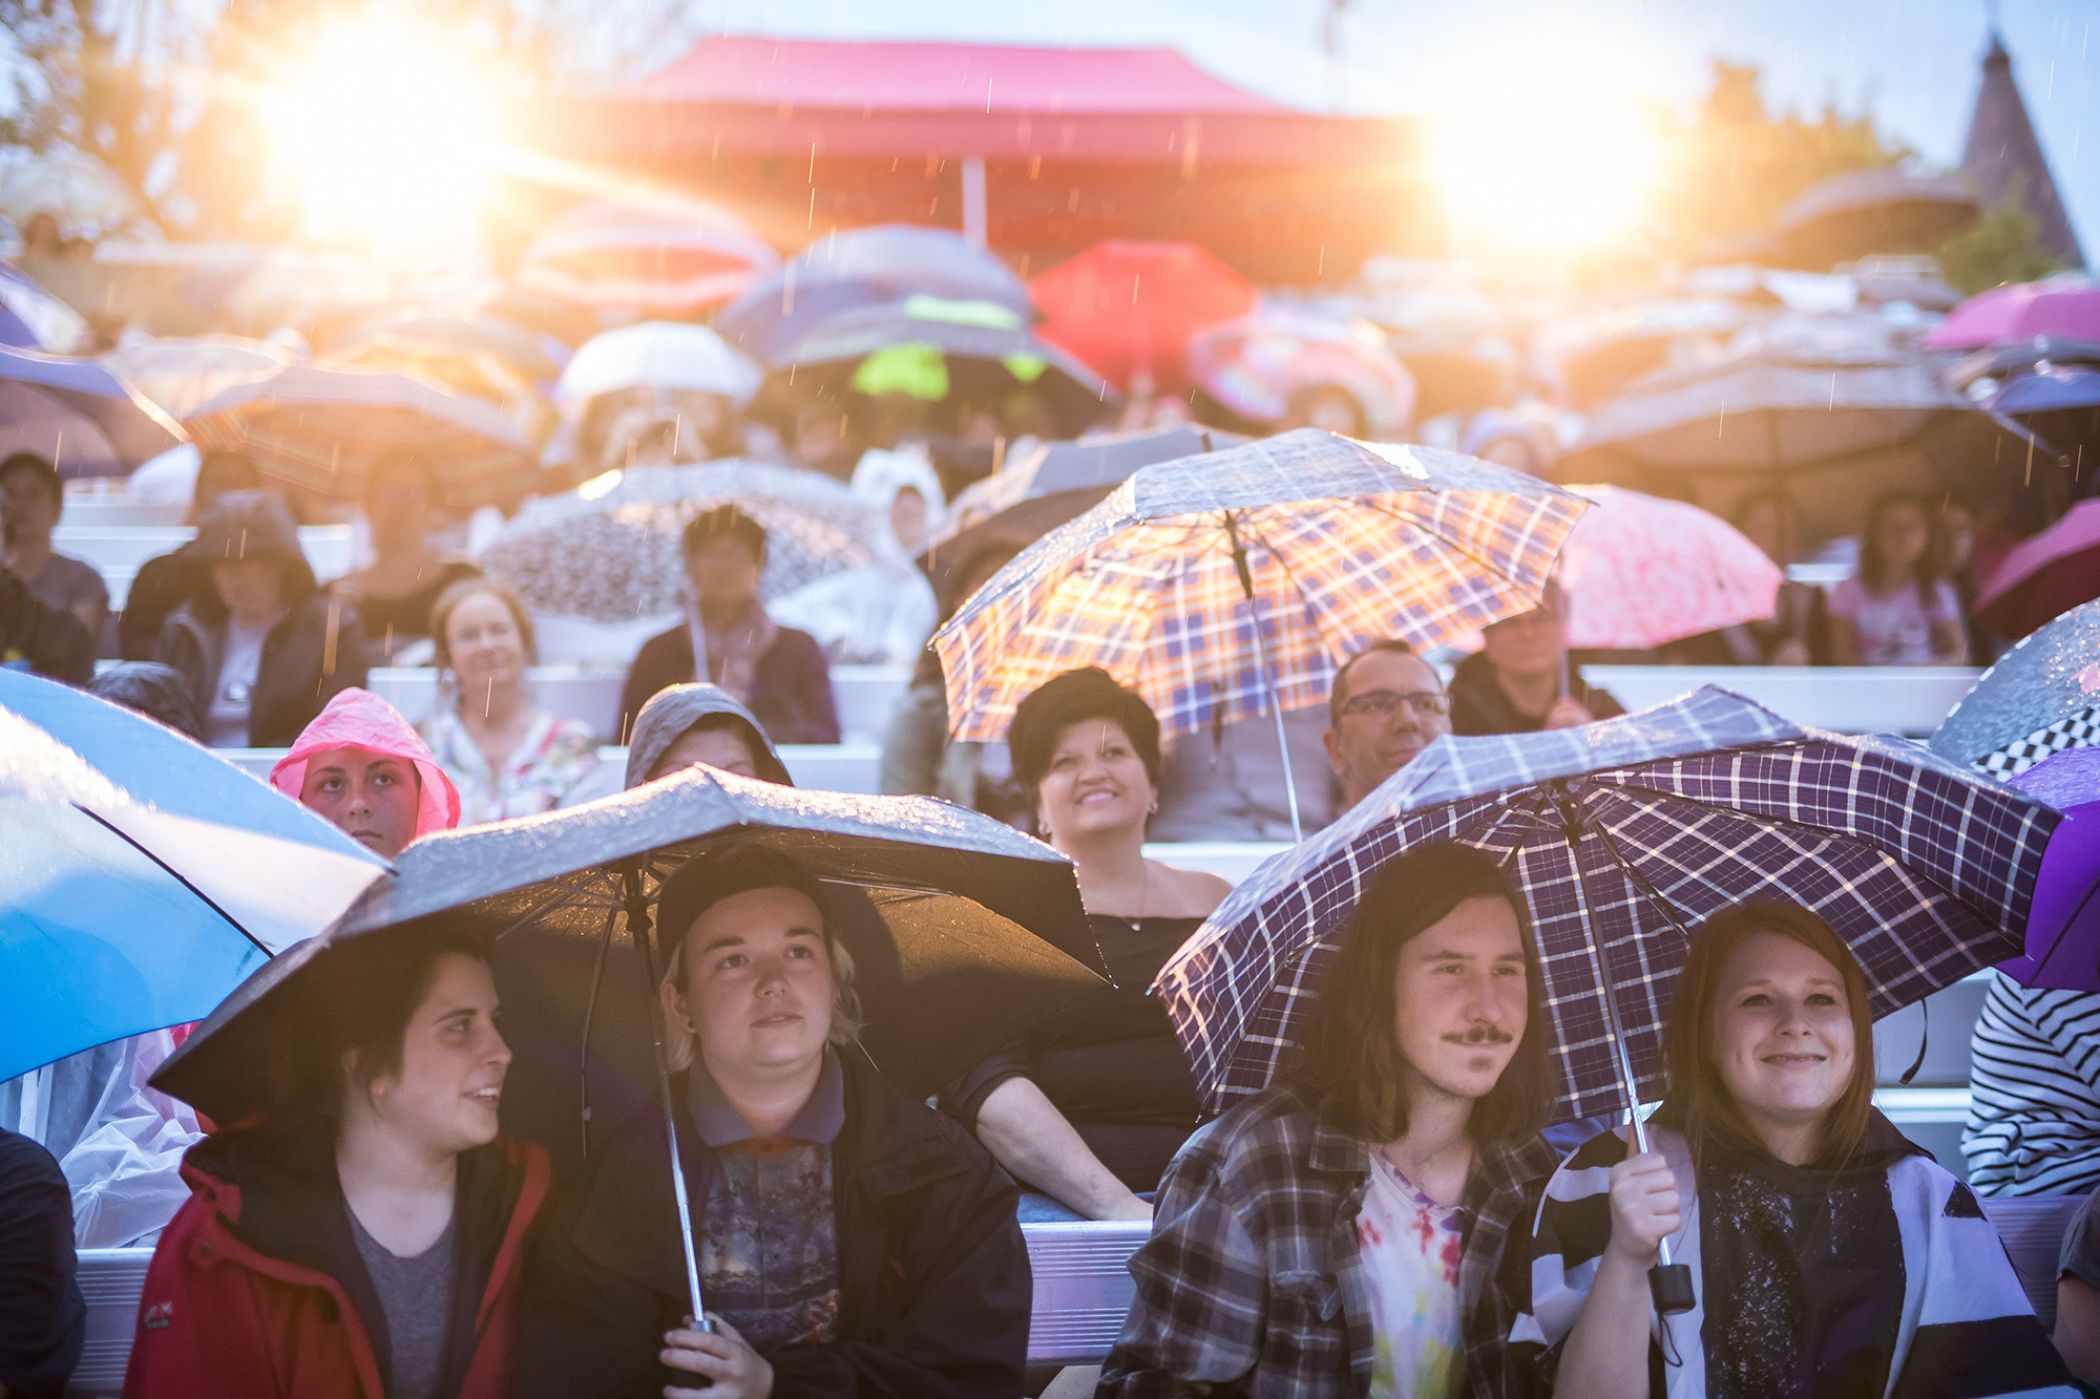 The rain did not stop the crowd  during the folk music festival in St-Jérôme.